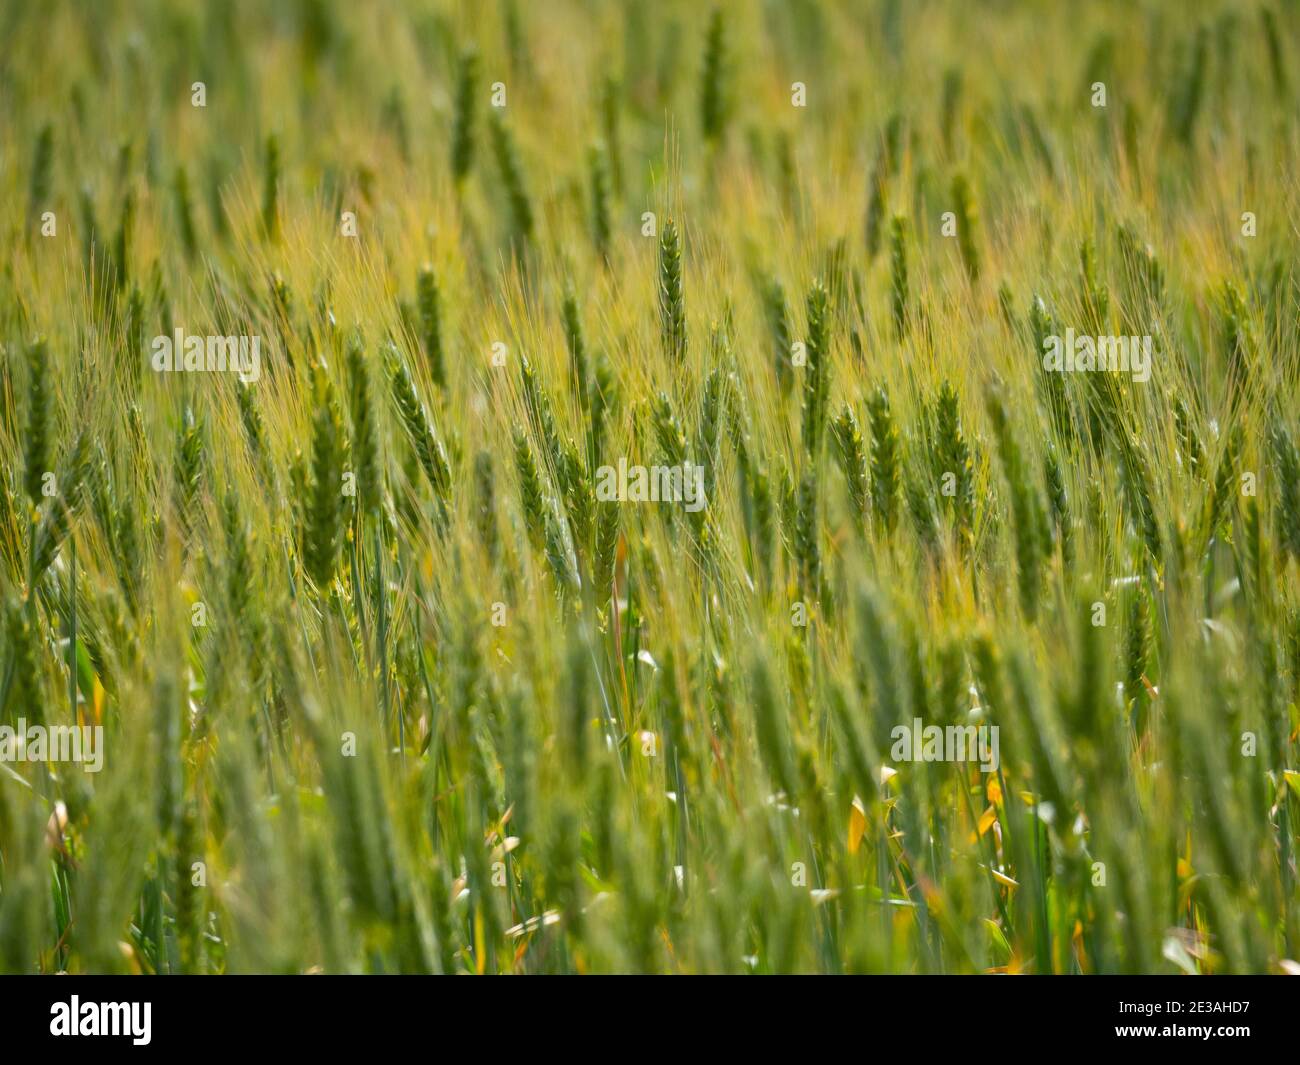 Wheat field background showing green plants with stalks and bushel heads with grain. Stock Photo